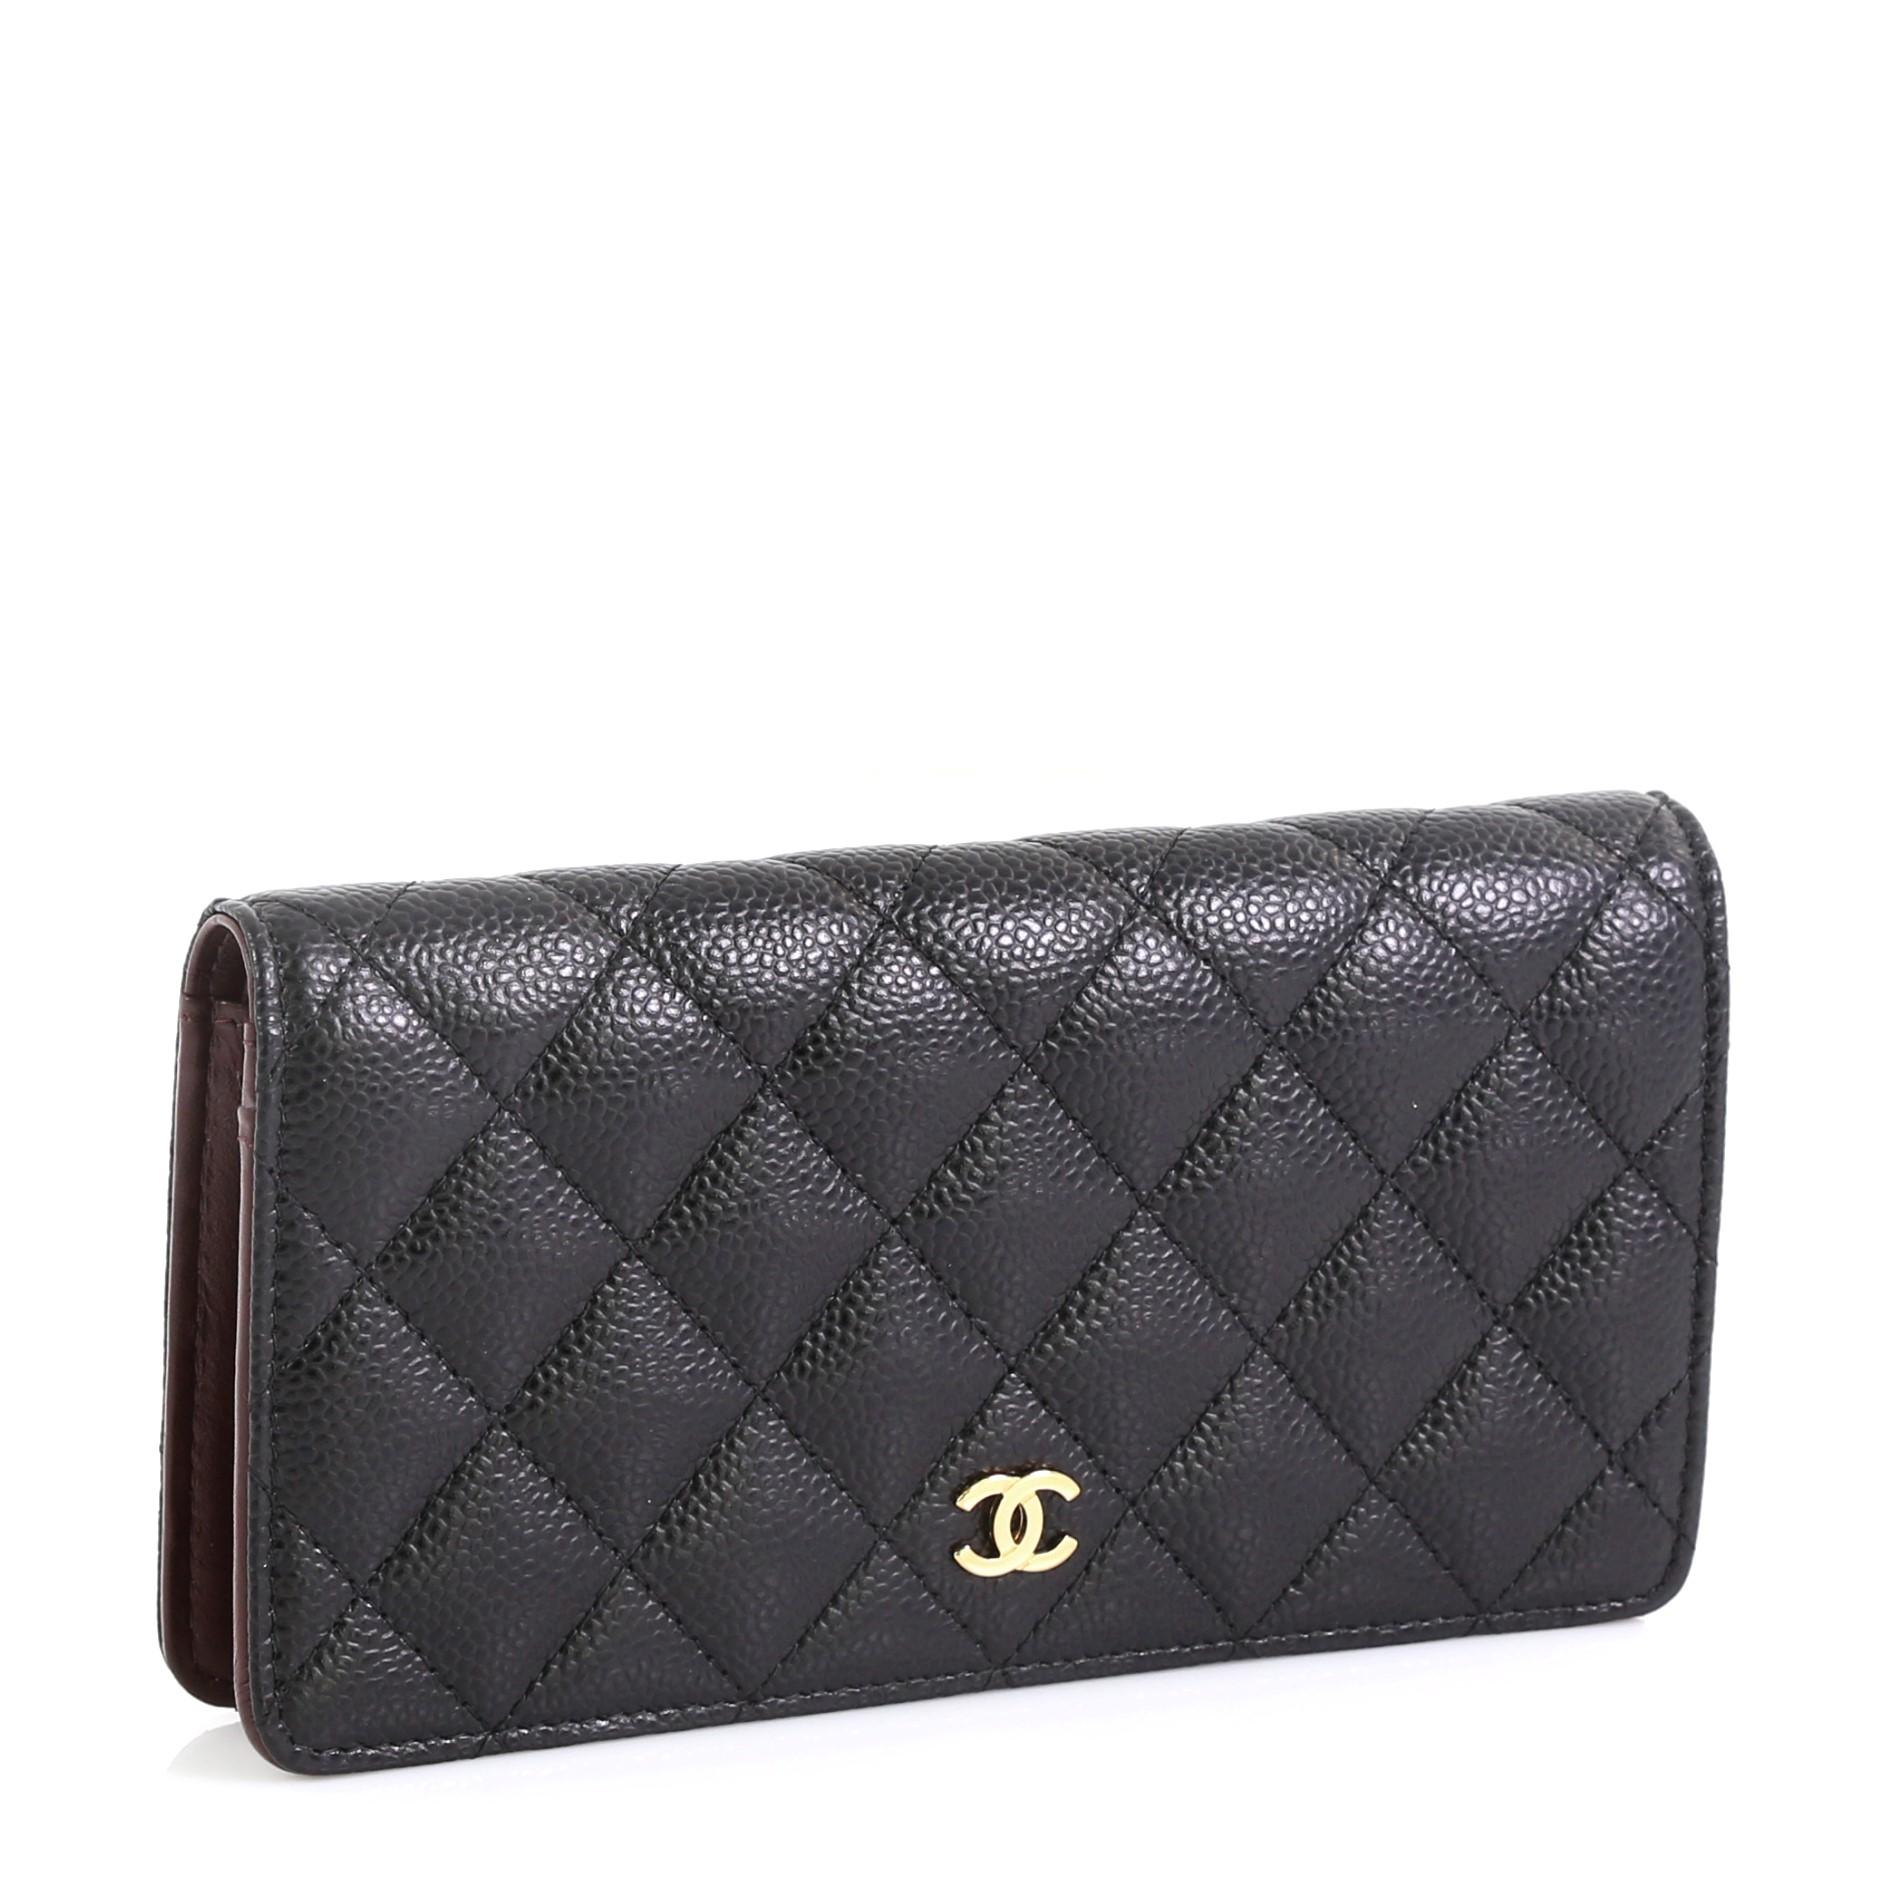 This Chanel L-Yen Wallet Quilted Caviar, crafted from black quilted caviar leather, features small CC logo, back slip pocket, and gold-tone hardware. It opens to a red leather interior with multiple card slots, long flat pockets, gusseted